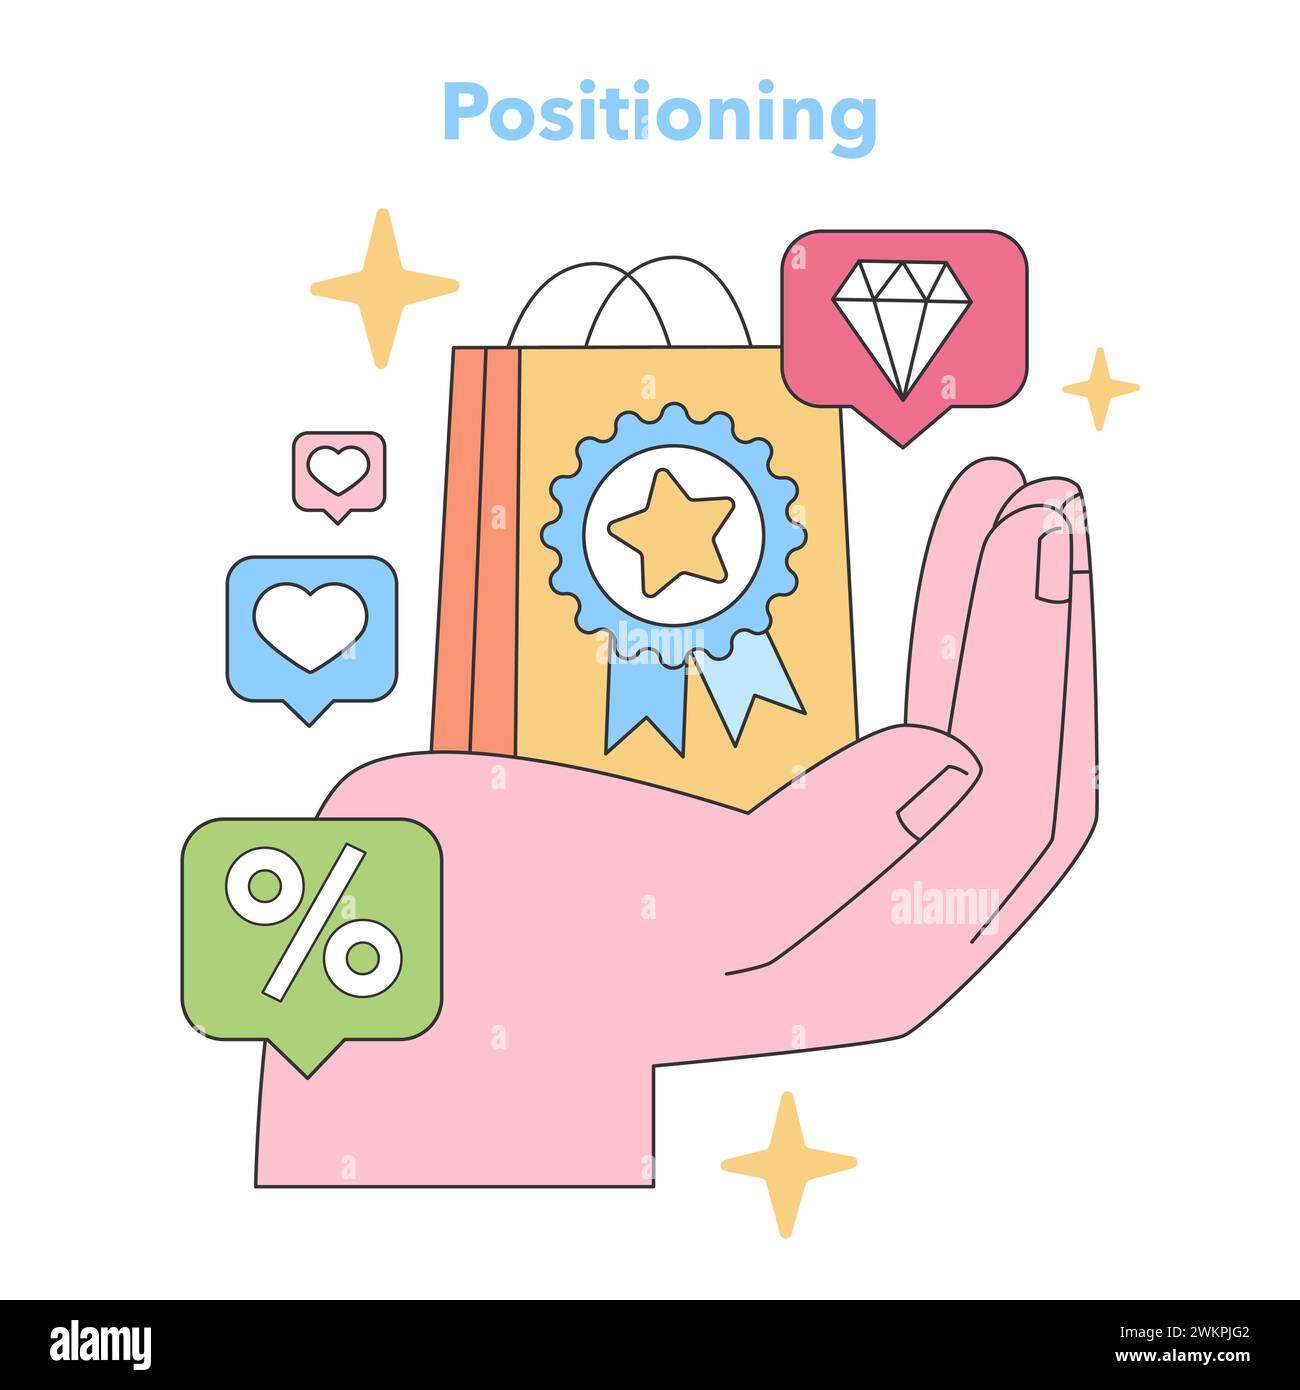 Positioning concept. A hand presents a branded bag, accentuating premium quality, customer loyalty, and special offers. Emphasizing brand value and superior market stance. Flat vector illustration Stock Vector